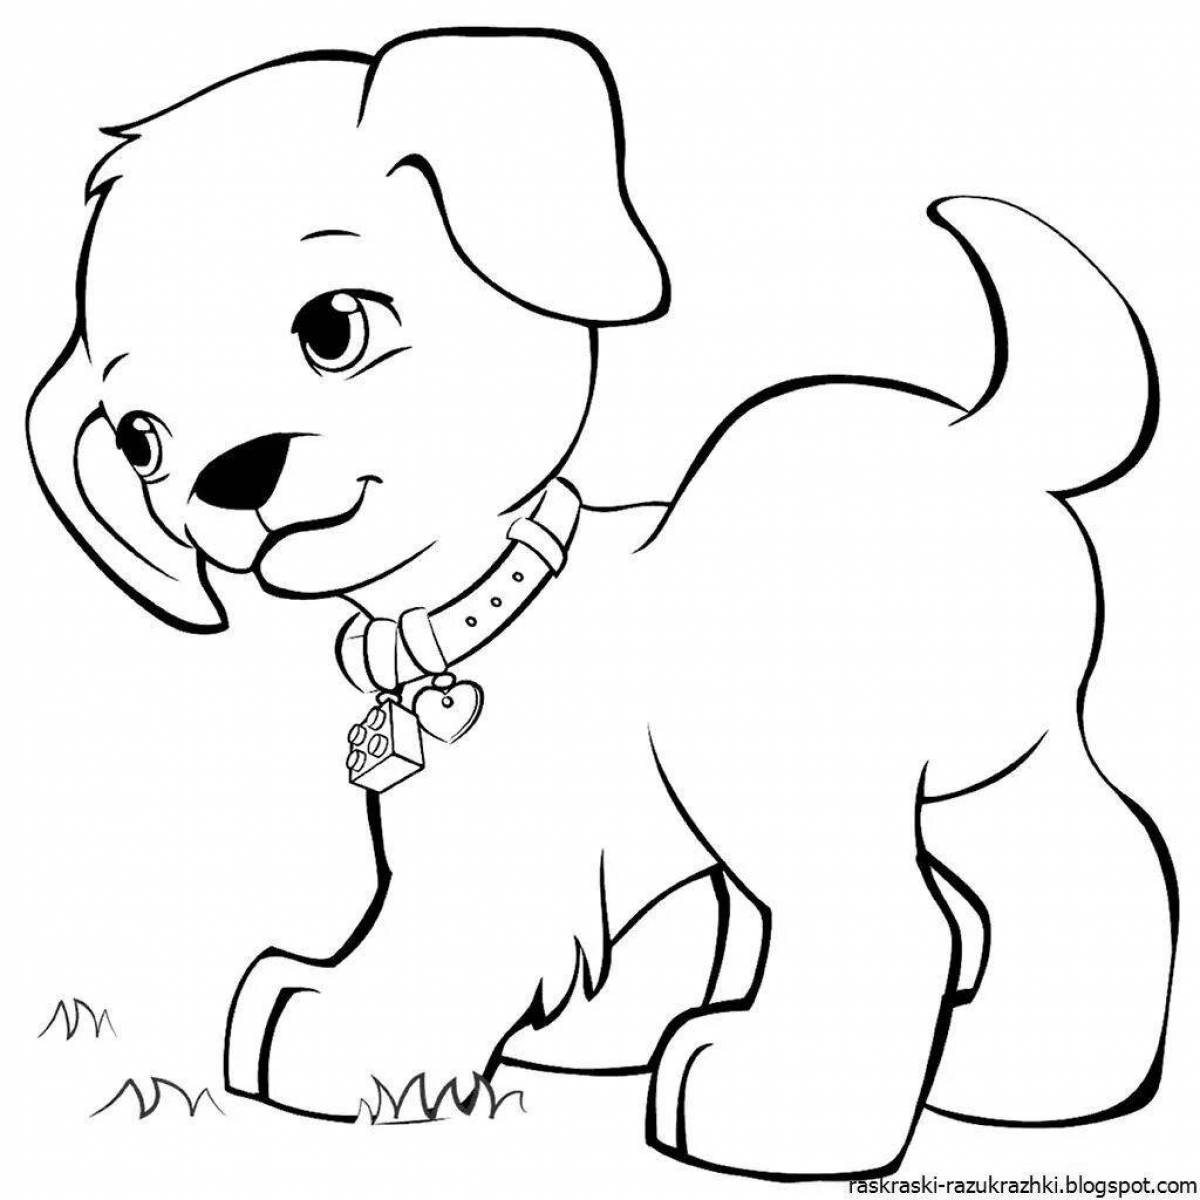 Live coloring dog for children 7-8 years old